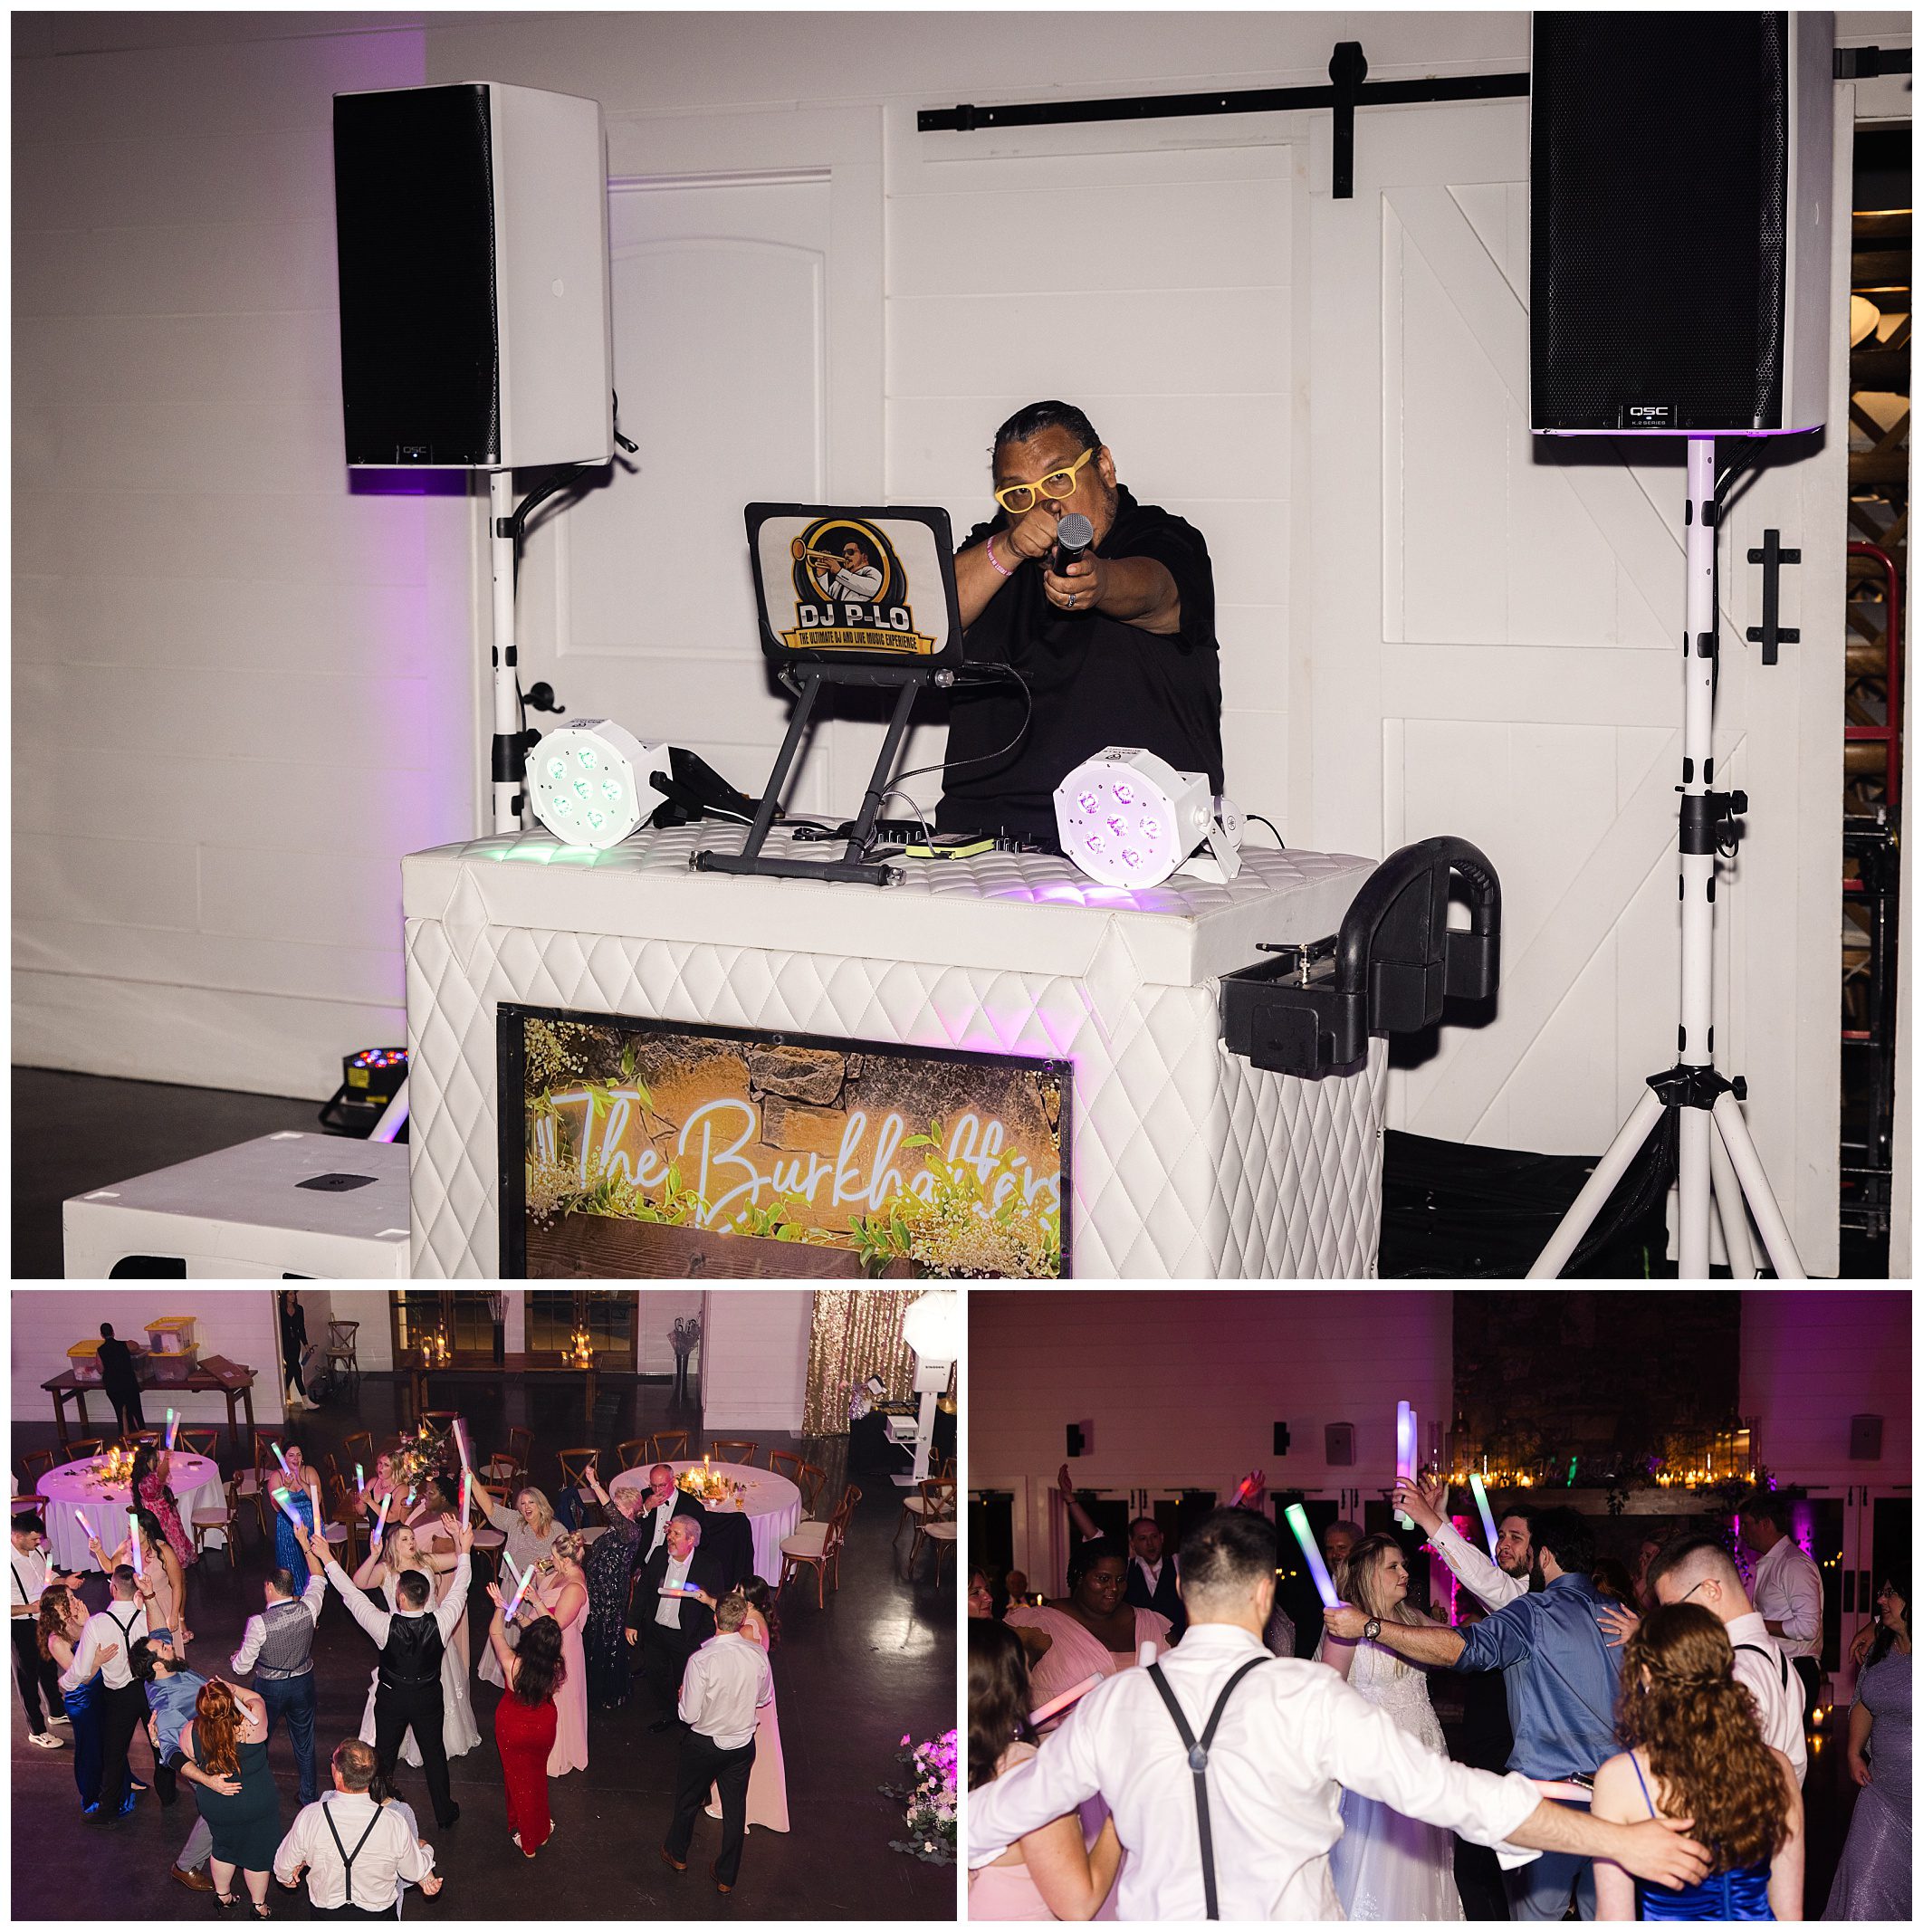 DJ with headphones performs at a mountain wedding at Chestnut Ridge while guests dance enthusiastically on the dance floor below.